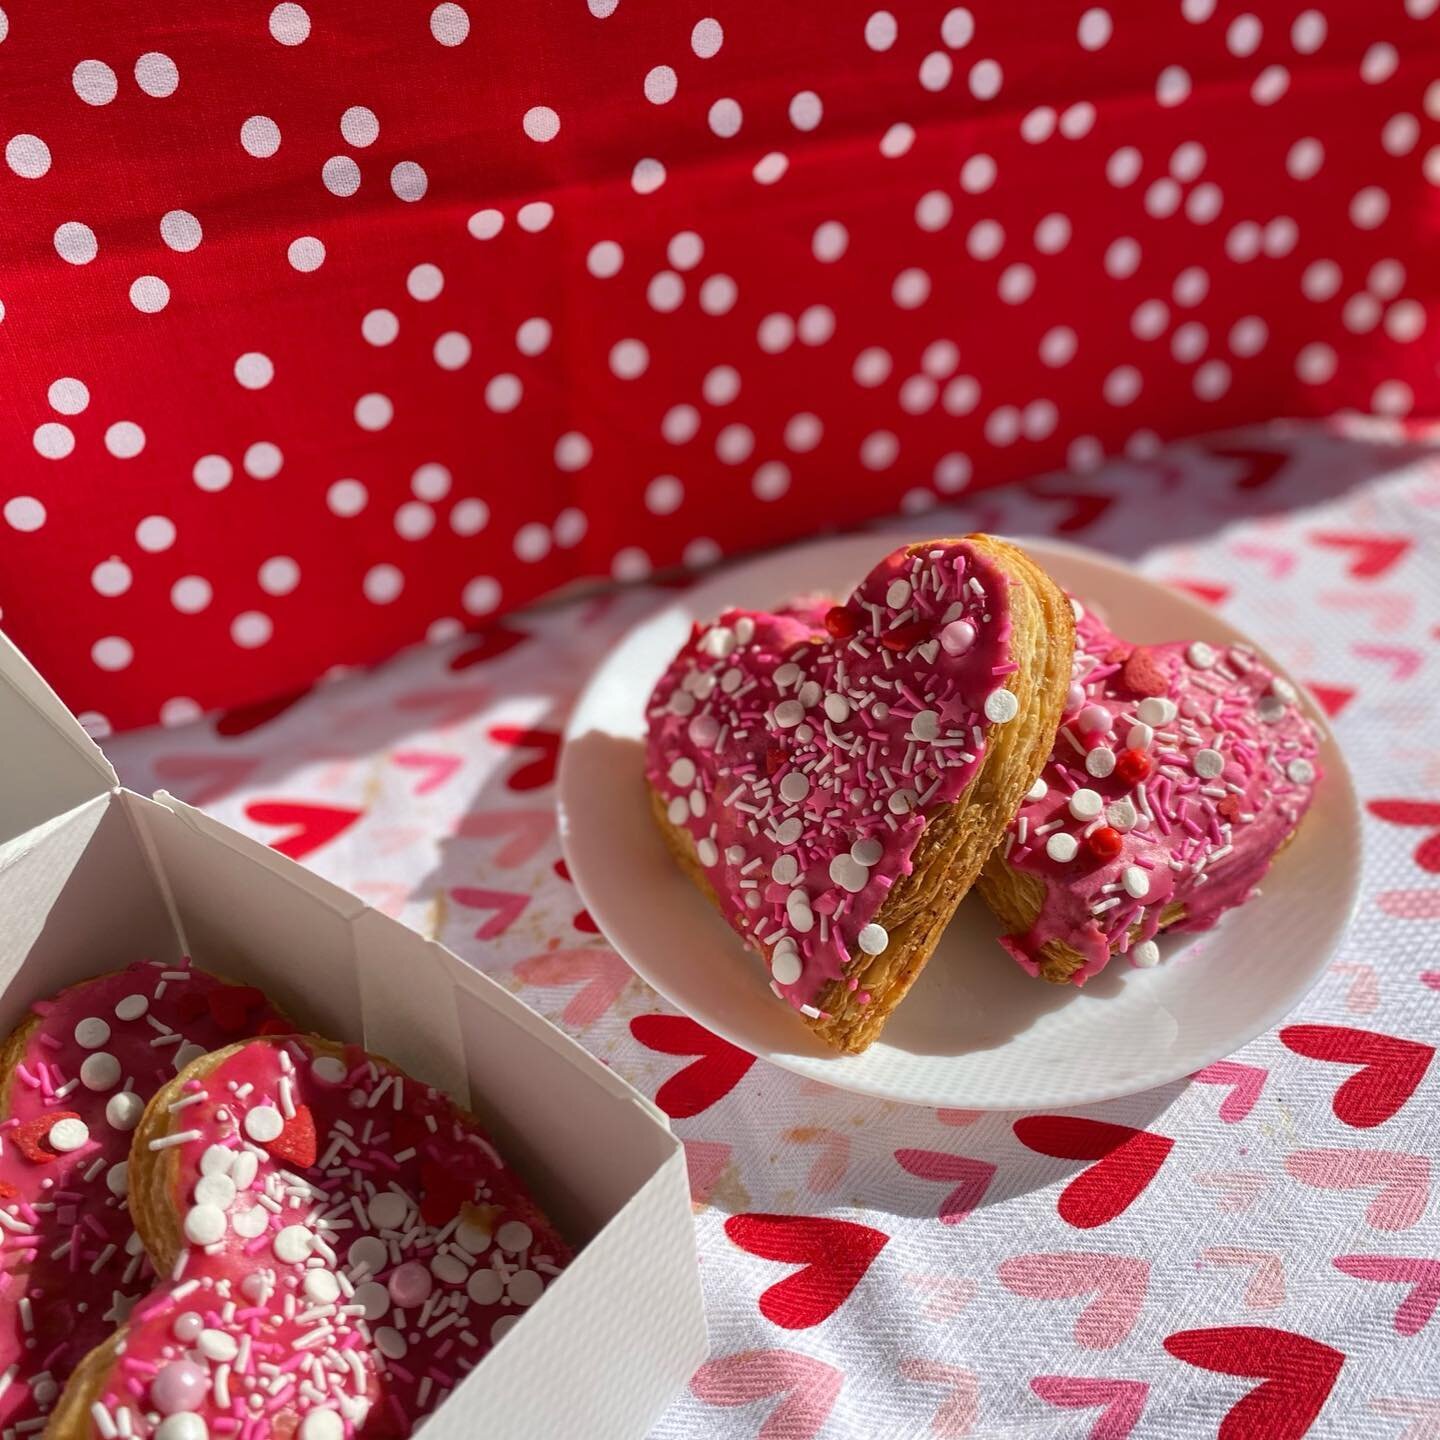 VALENTINE&rsquo;S DAY IS ALMOST HERE!! Heart-shaped everything is the best 🤗💕 try our strawberry heart pop-tarts!